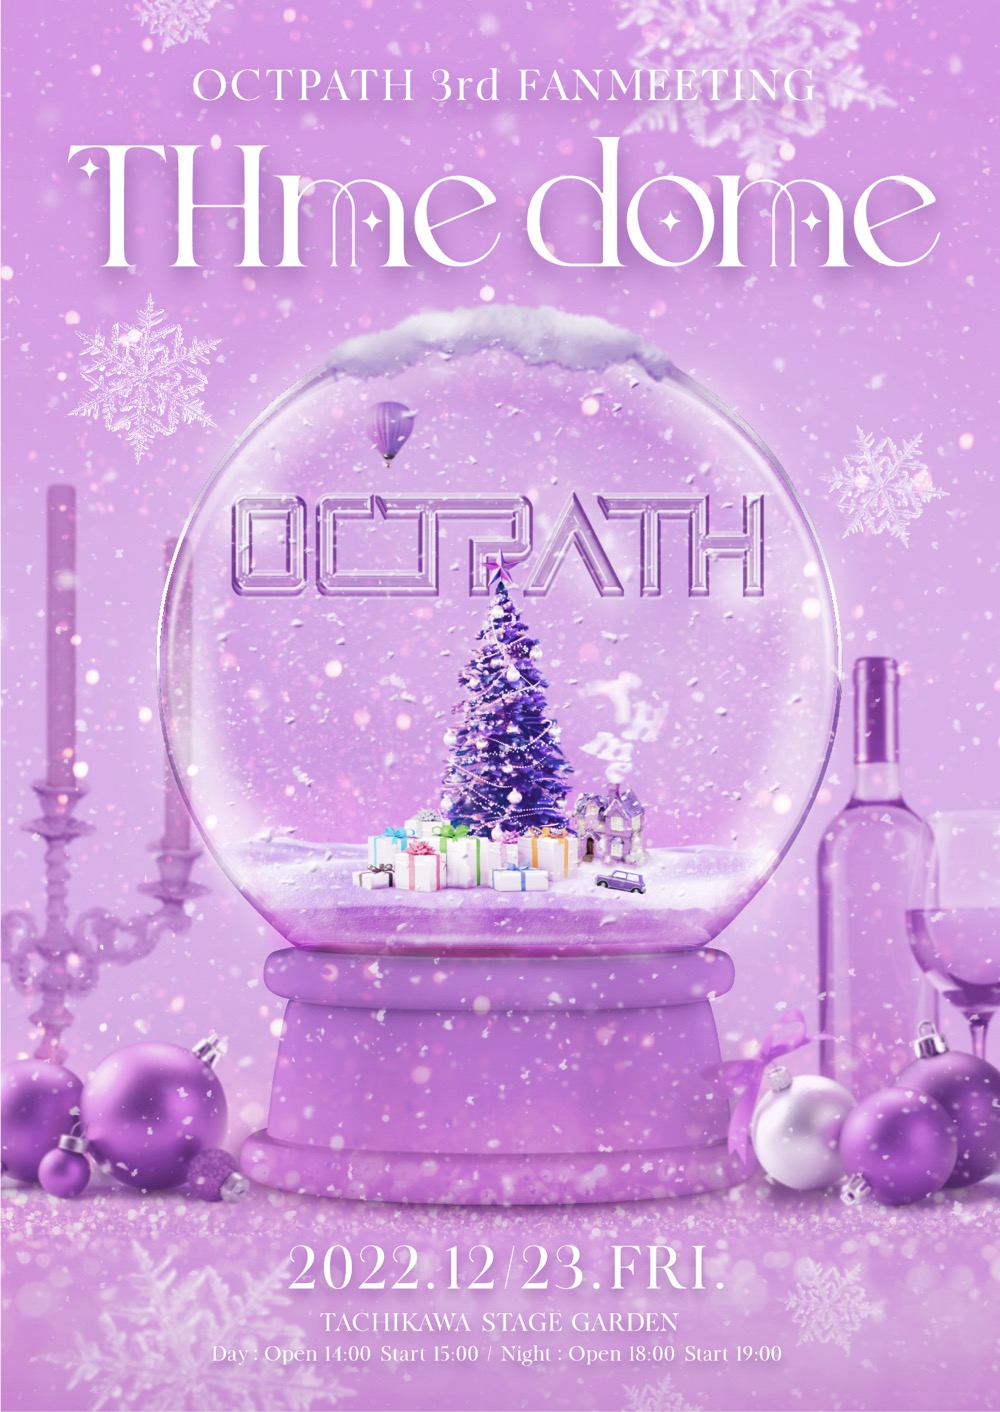 OCTPATH、『3rd FANMEETING　THme dome』開催決定 - 画像一覧（1/2）